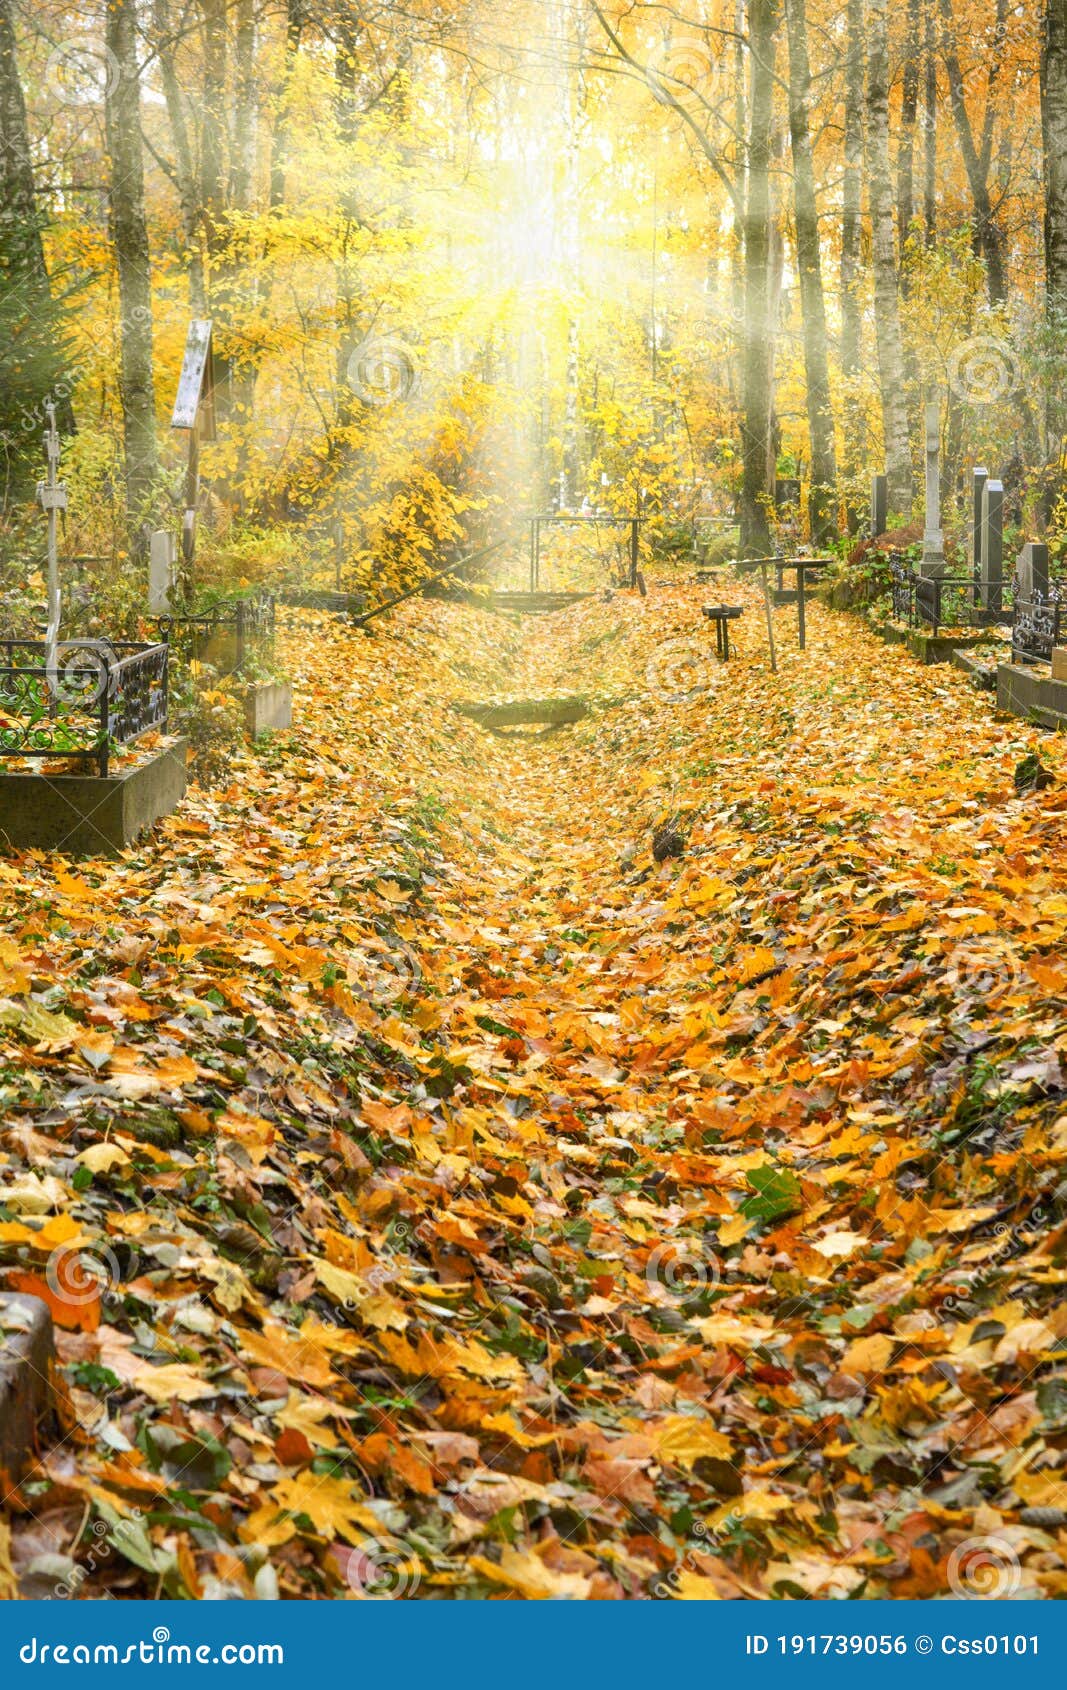 Autumn Alley Withfallen Leaves of Ancient Christian Cemetery Landscape